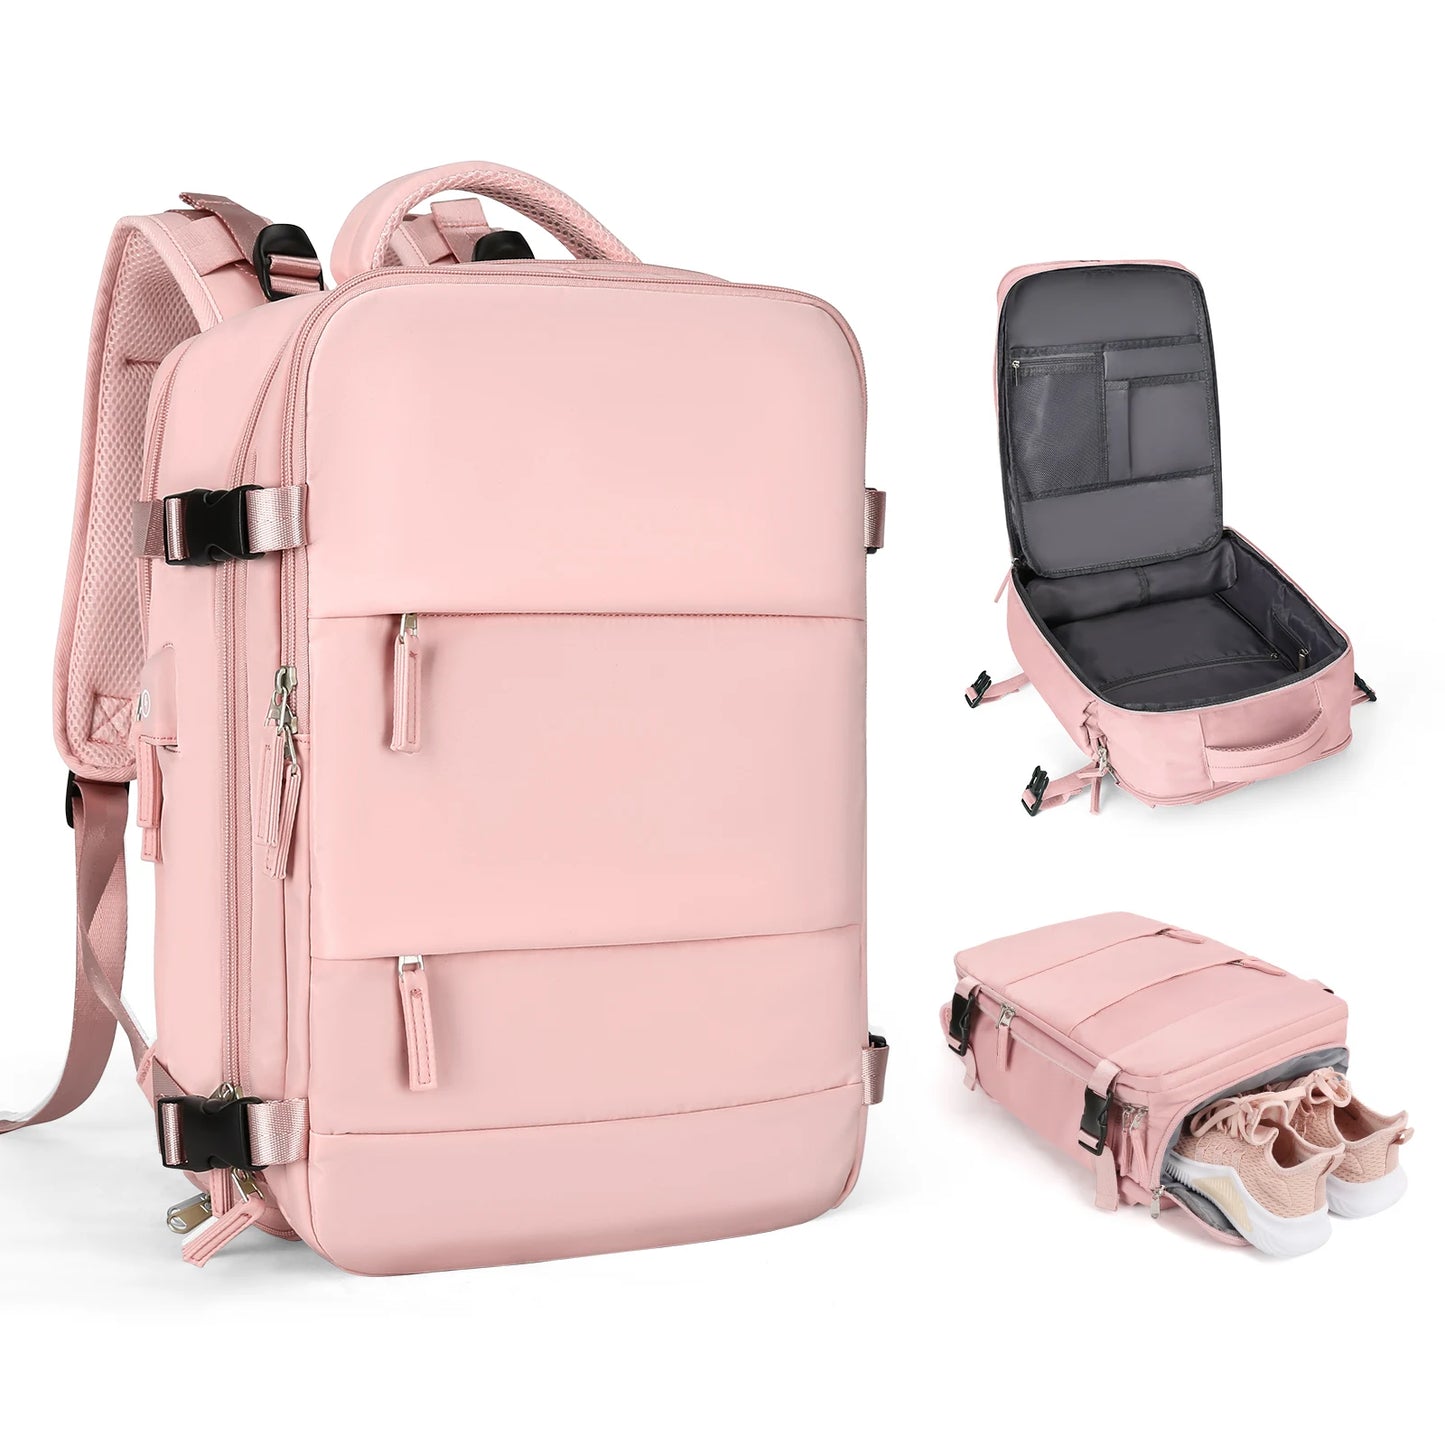  Dusty Pink pastel travel backpack personal item with wet dry pocket laptop sleeve usb charger and shoe sleeve